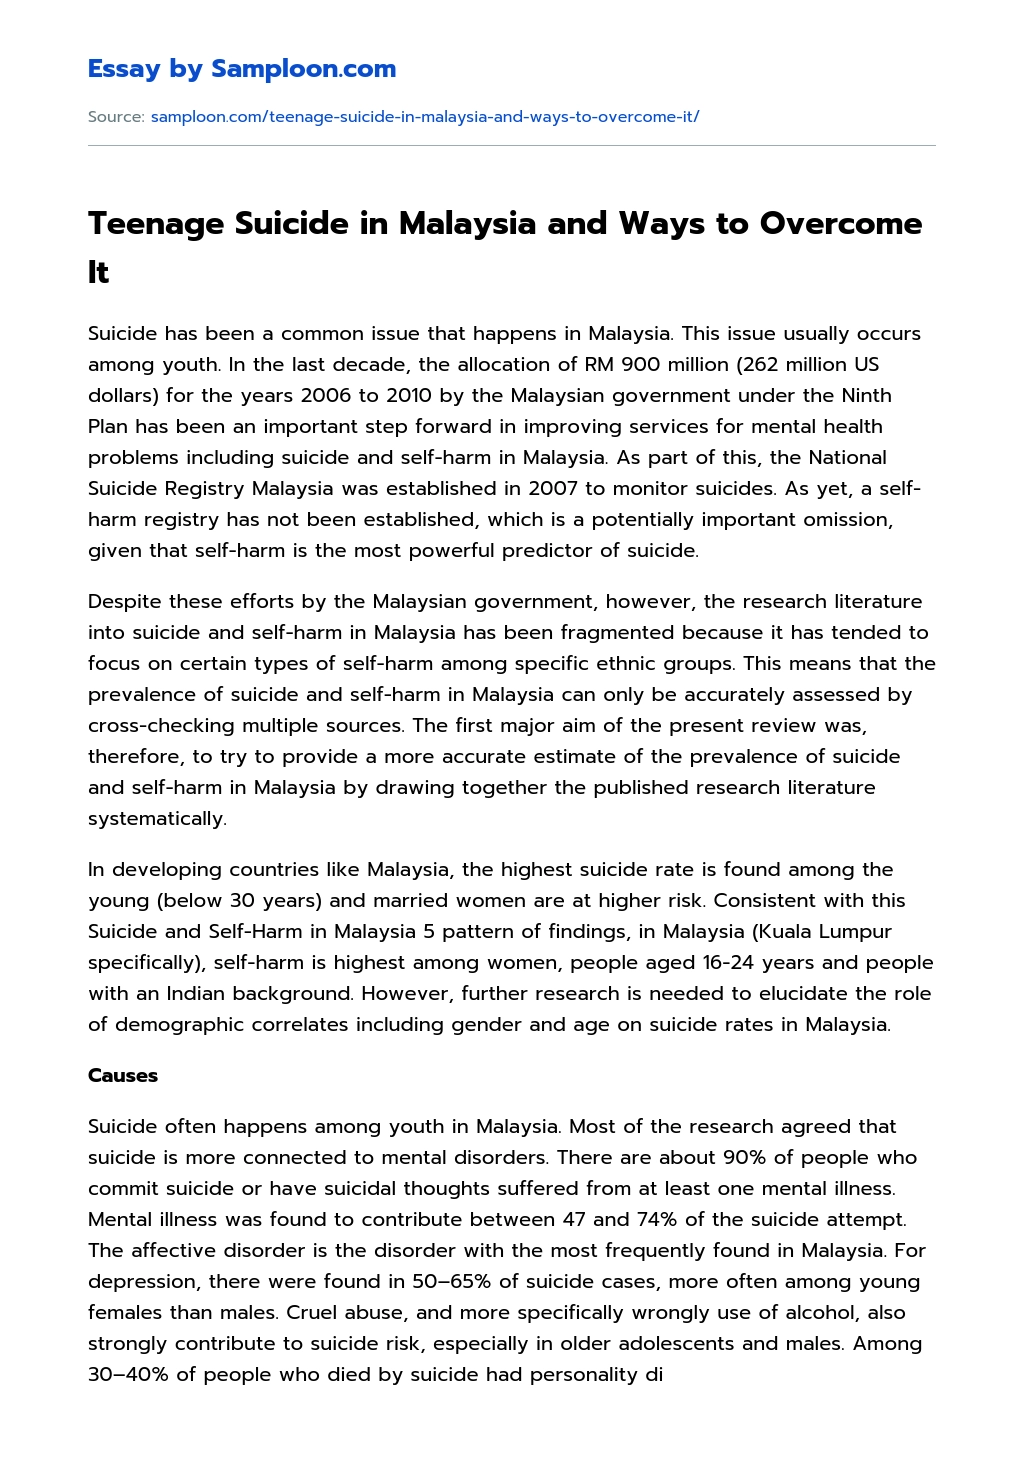 Teenage Suicide in Malaysia and Ways to Overcome It essay